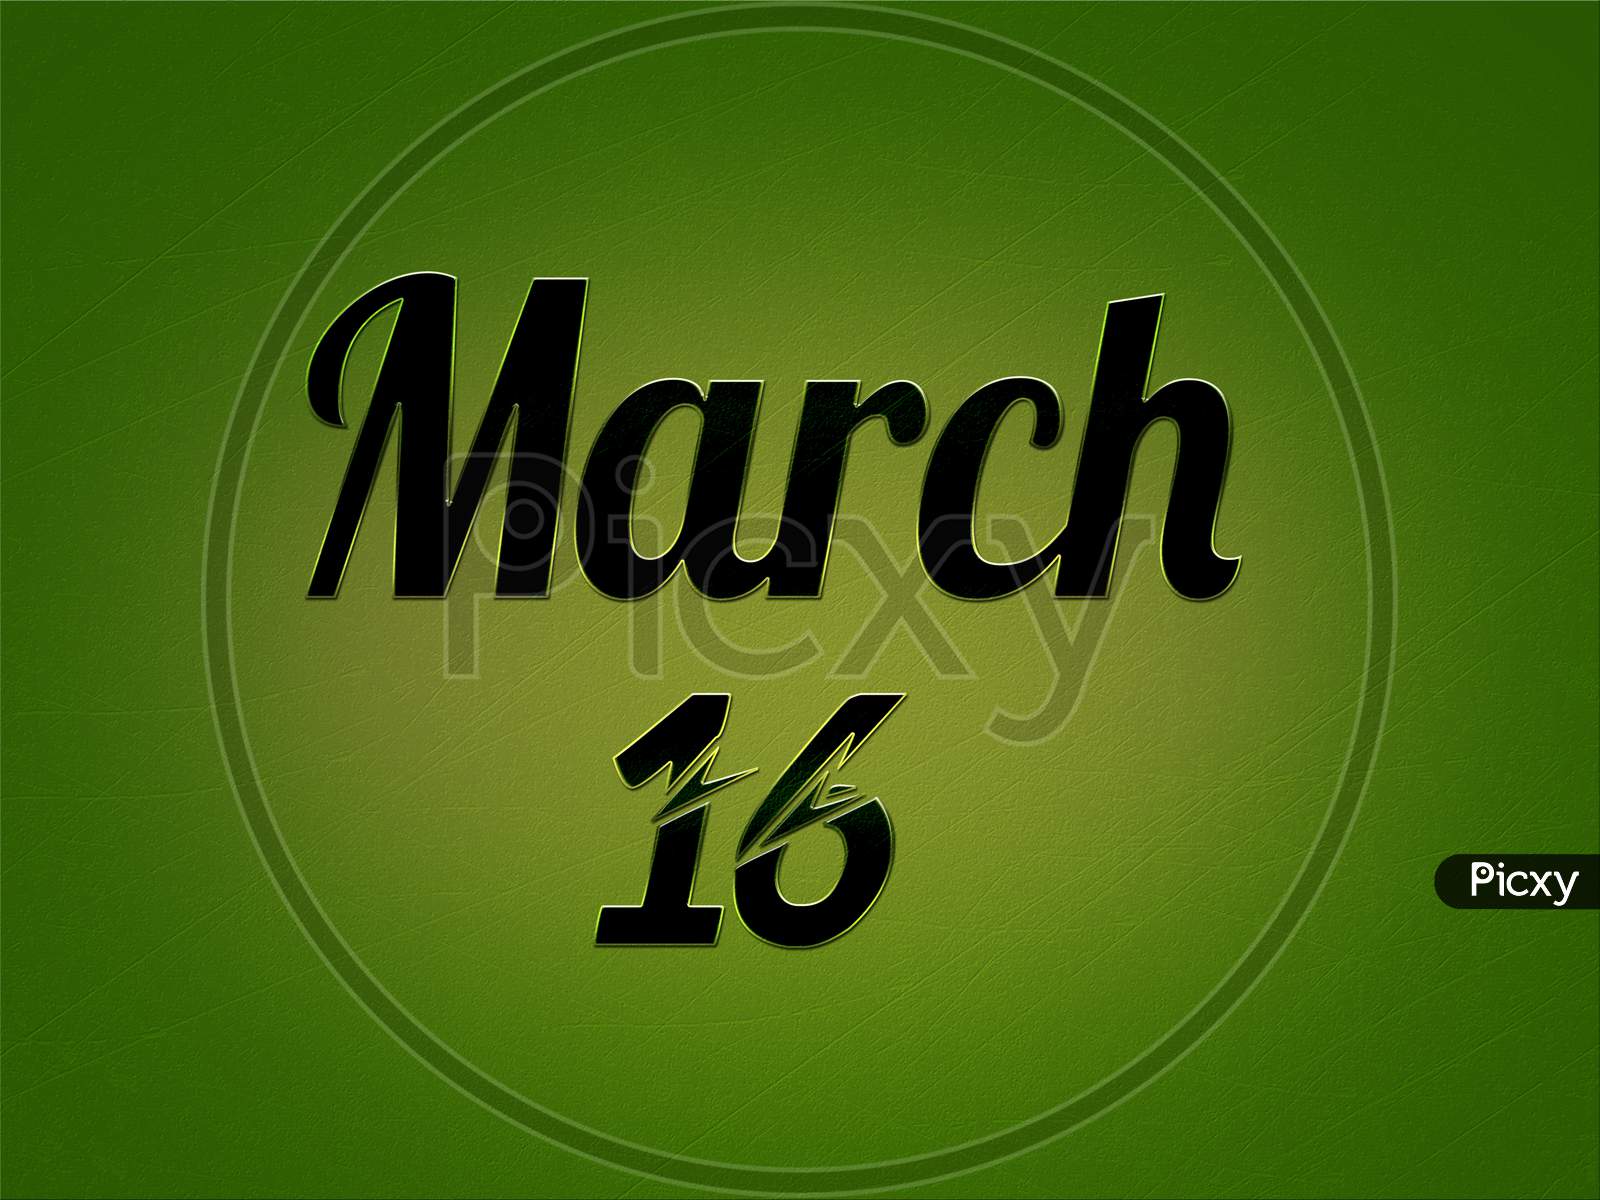 16 March, Monthly Calendar. Text Effect On Green Background